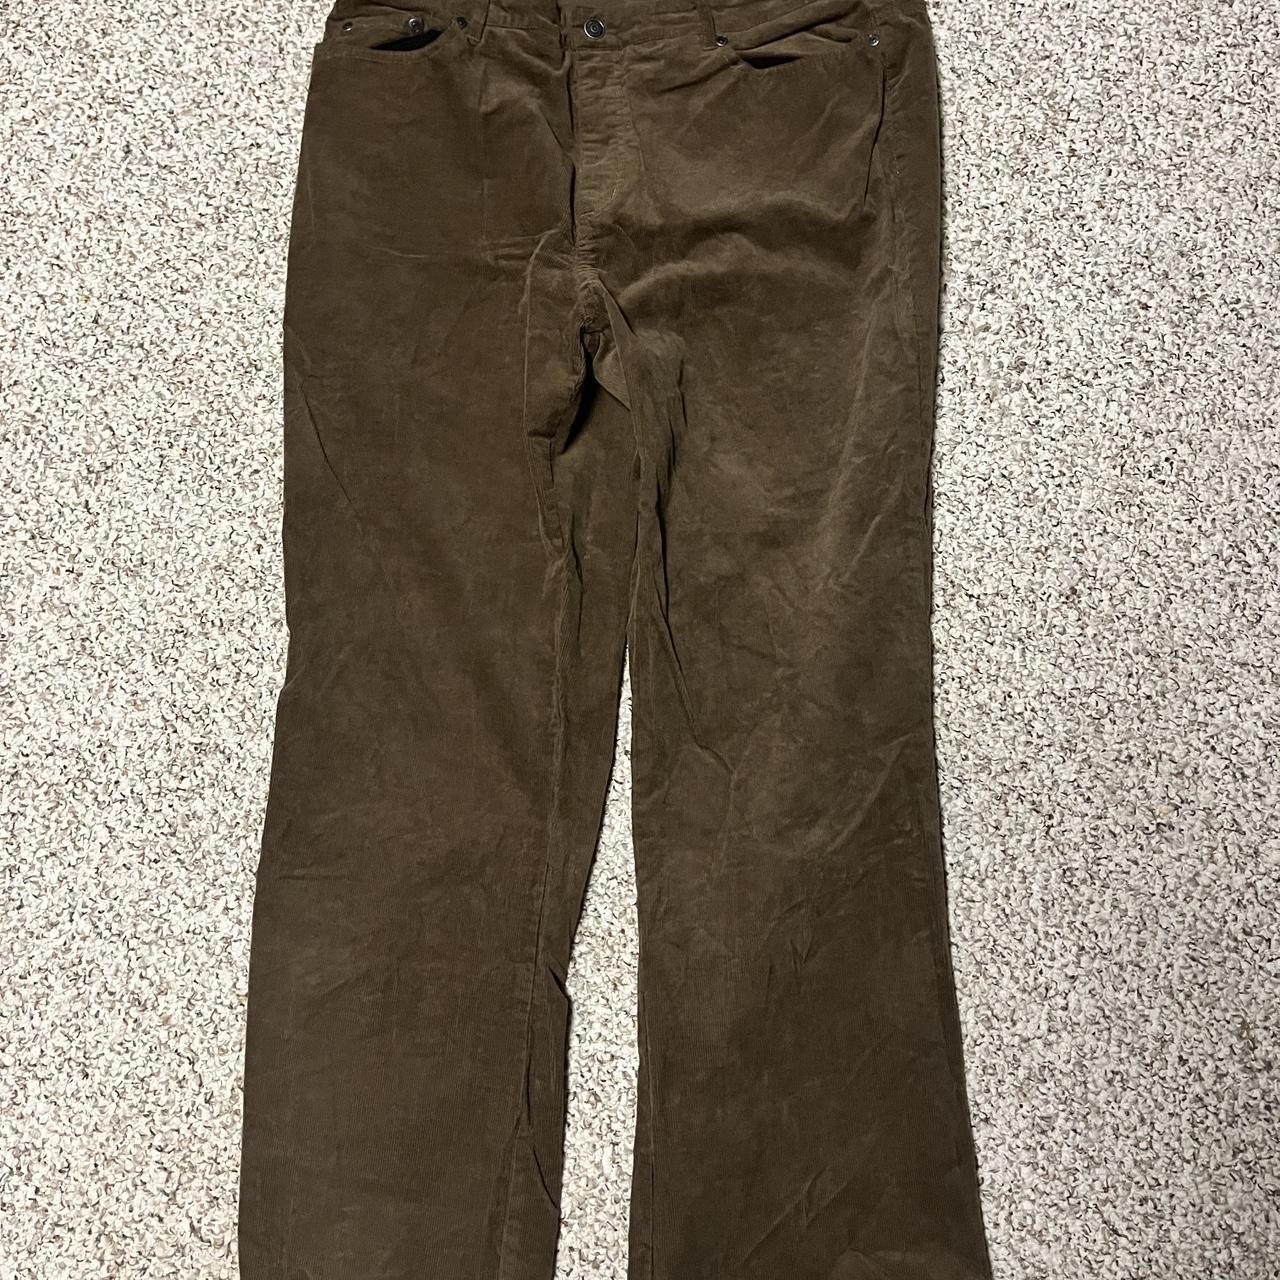 Brown Corduroy Women’s Pants Size 18 Baggy Able to... - Depop